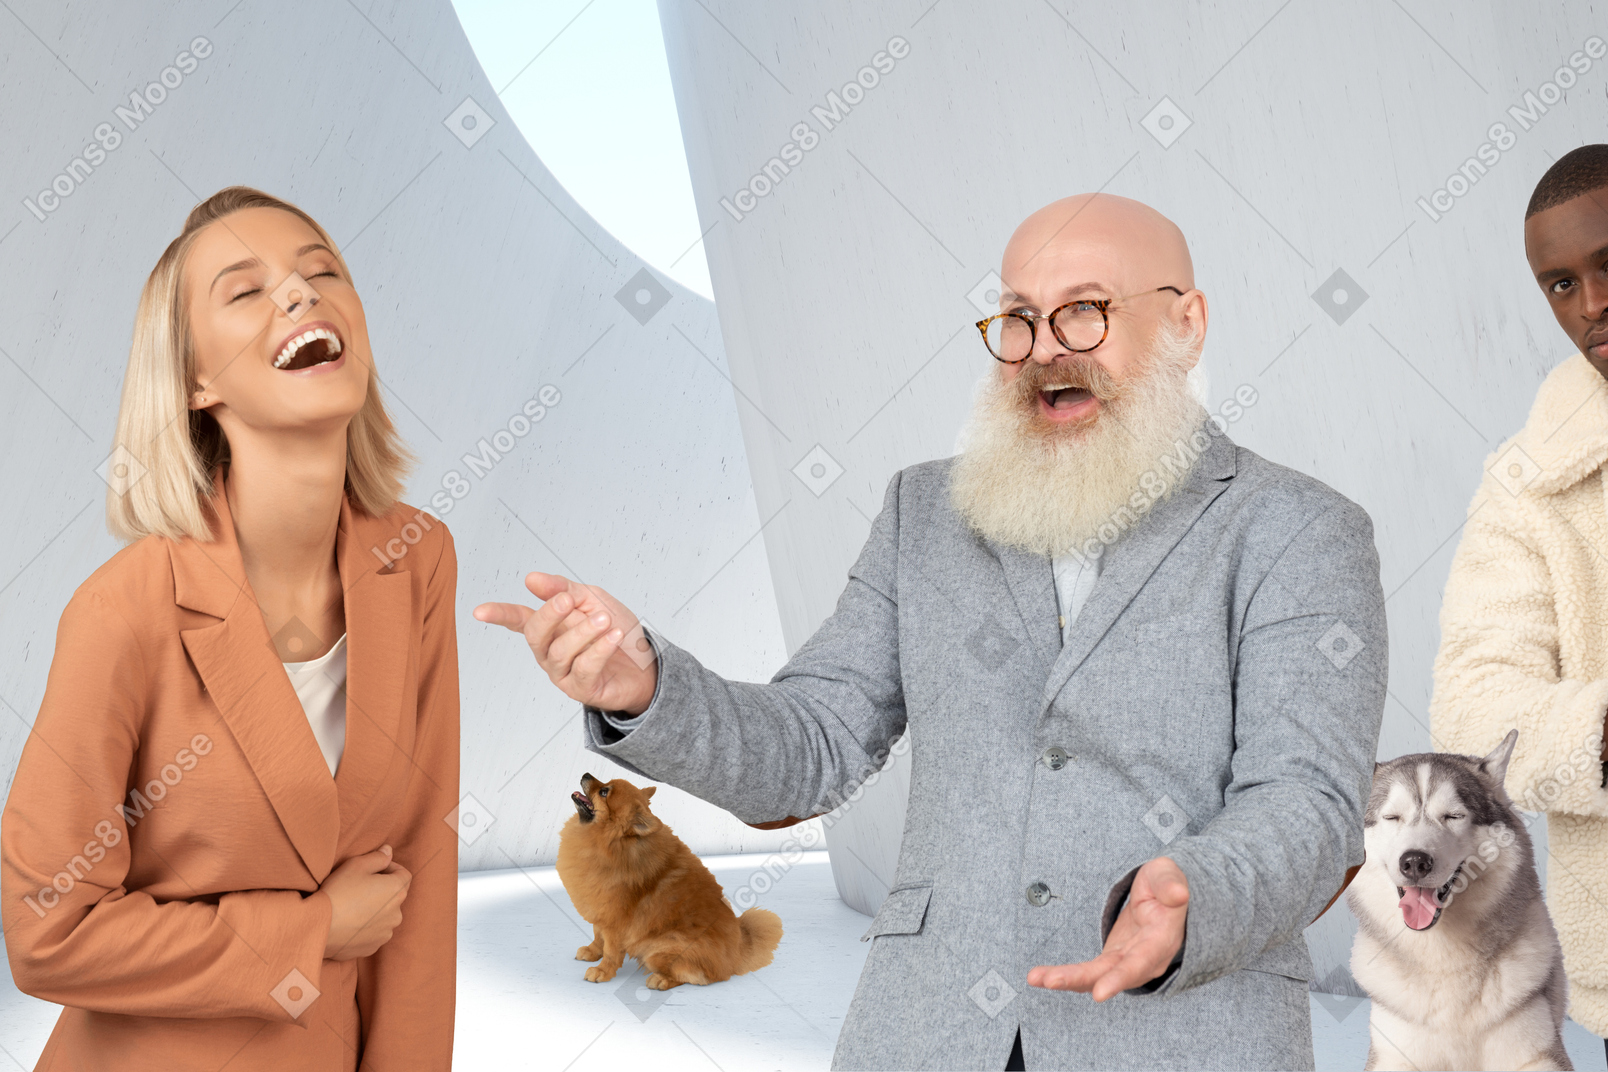 Young woman and mature man laughing about something next to serious young man